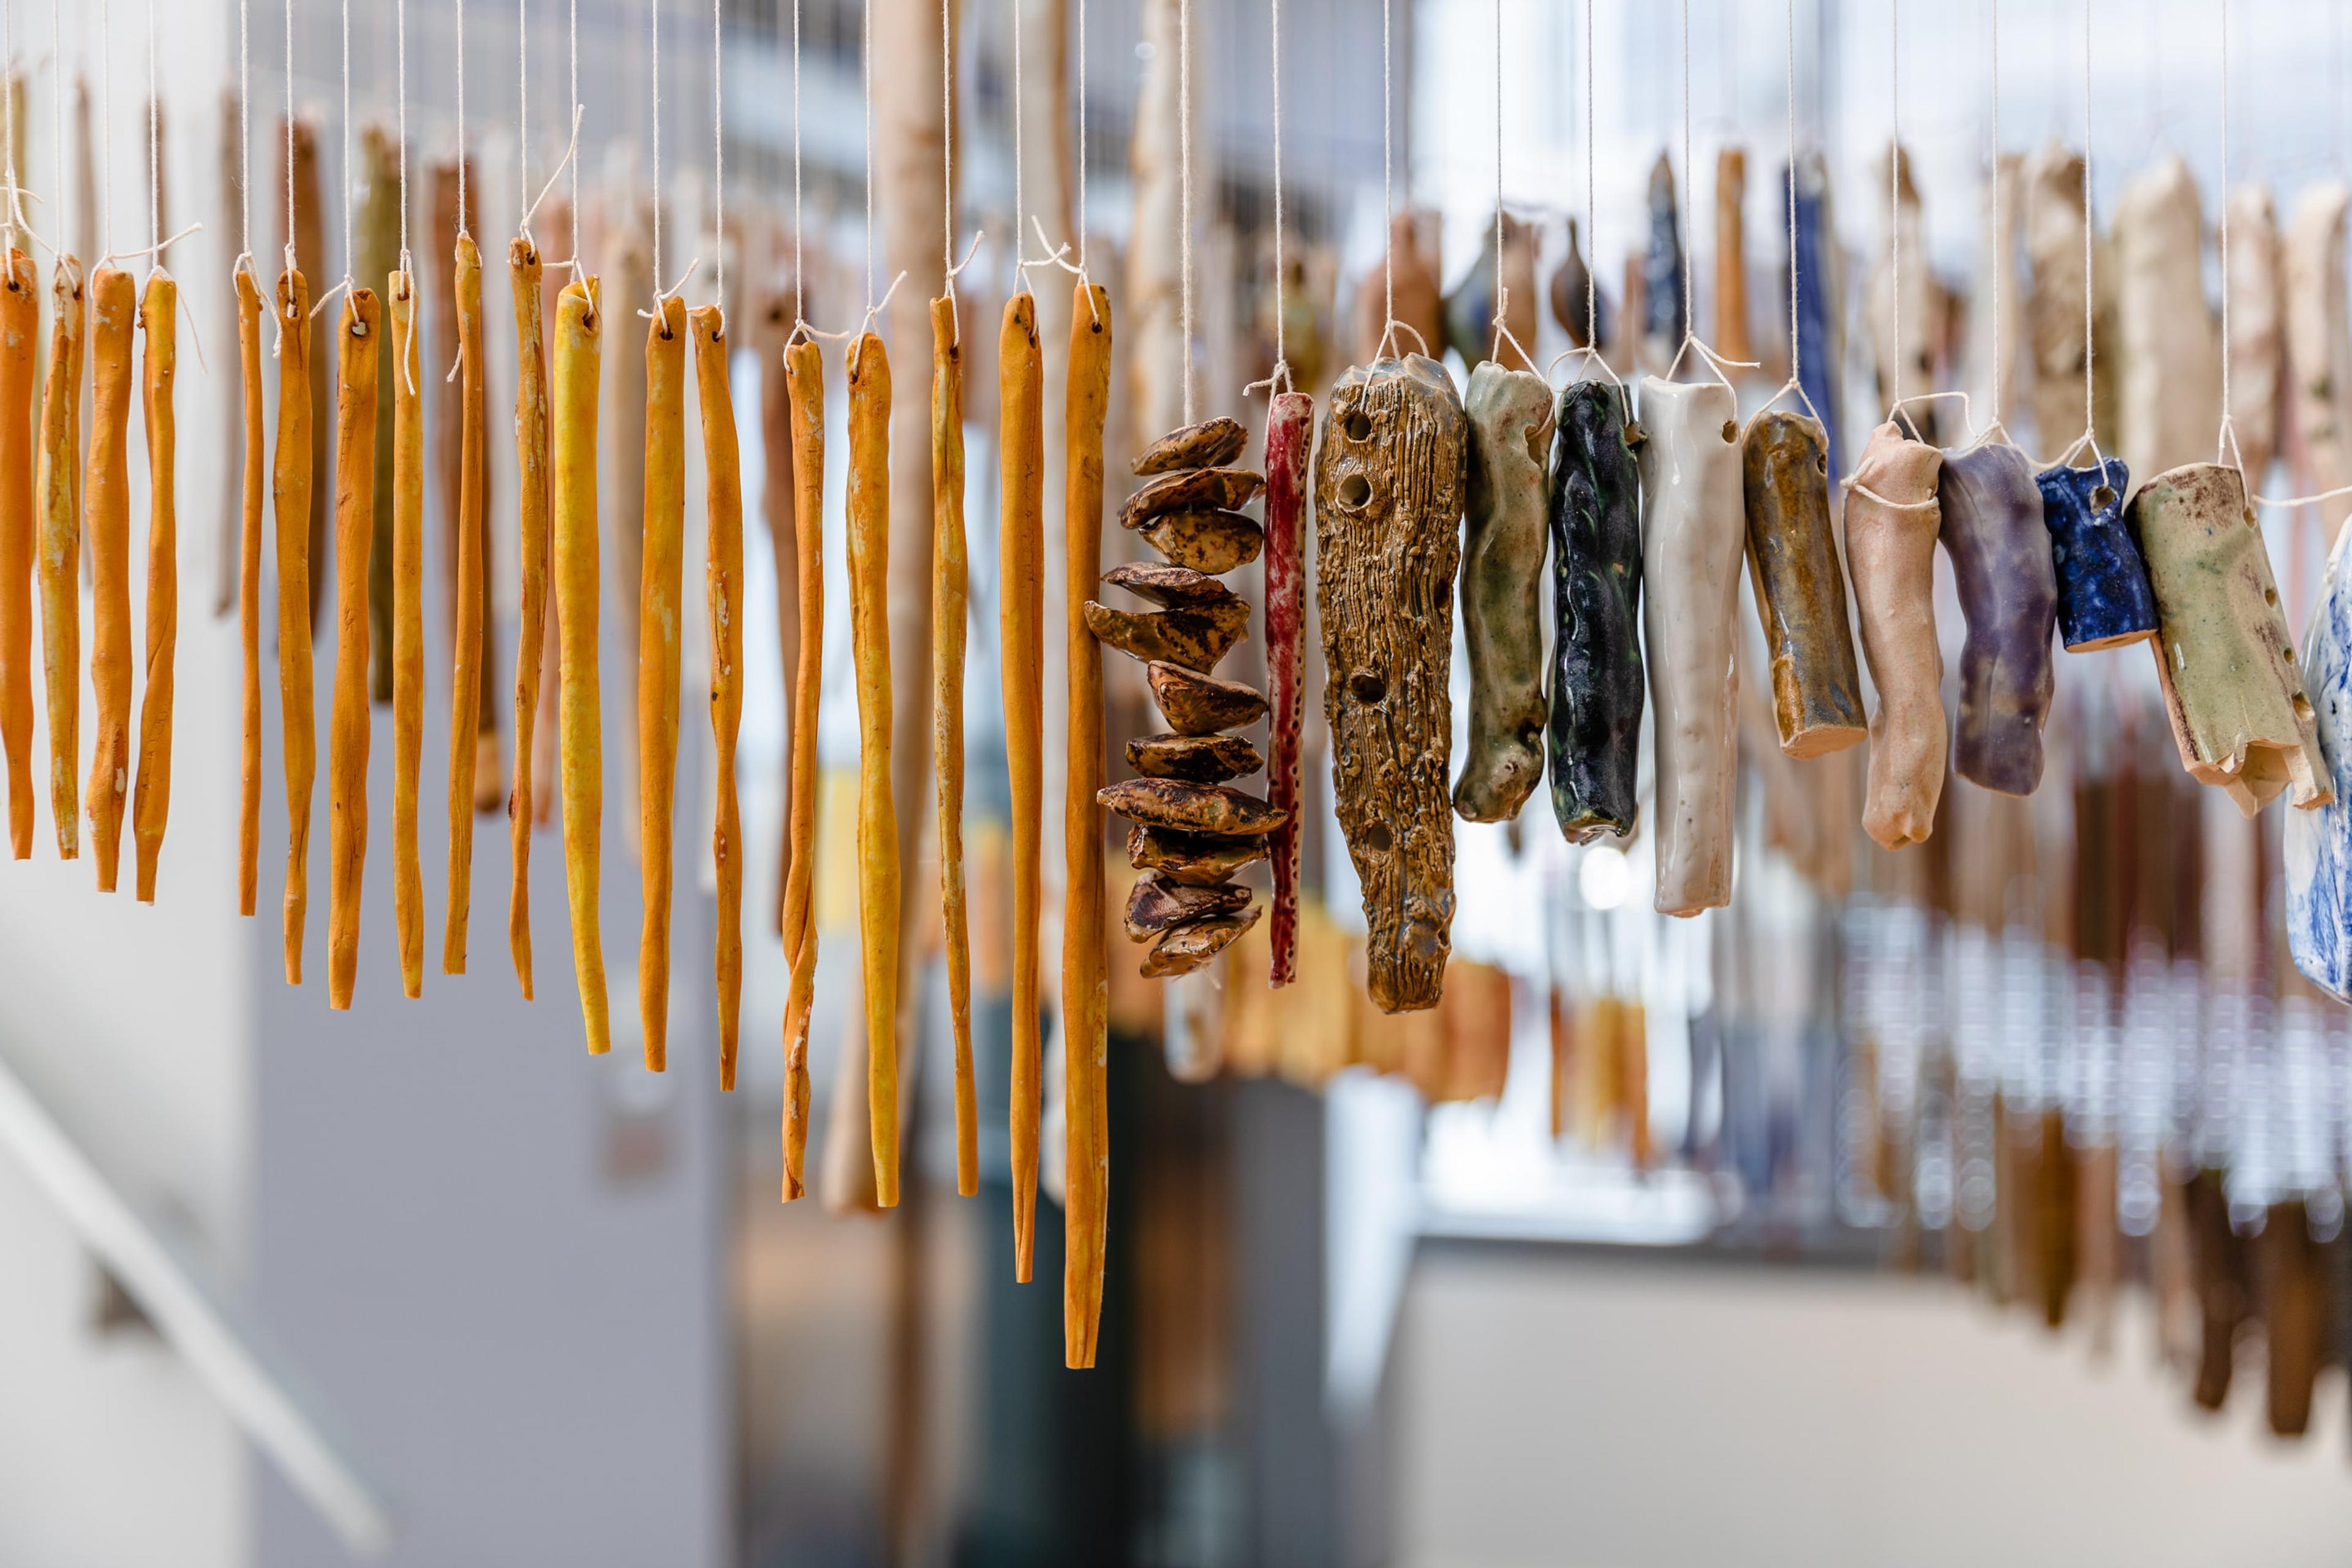 closeup photo of fine, long ceramic objects dangling from thin strings